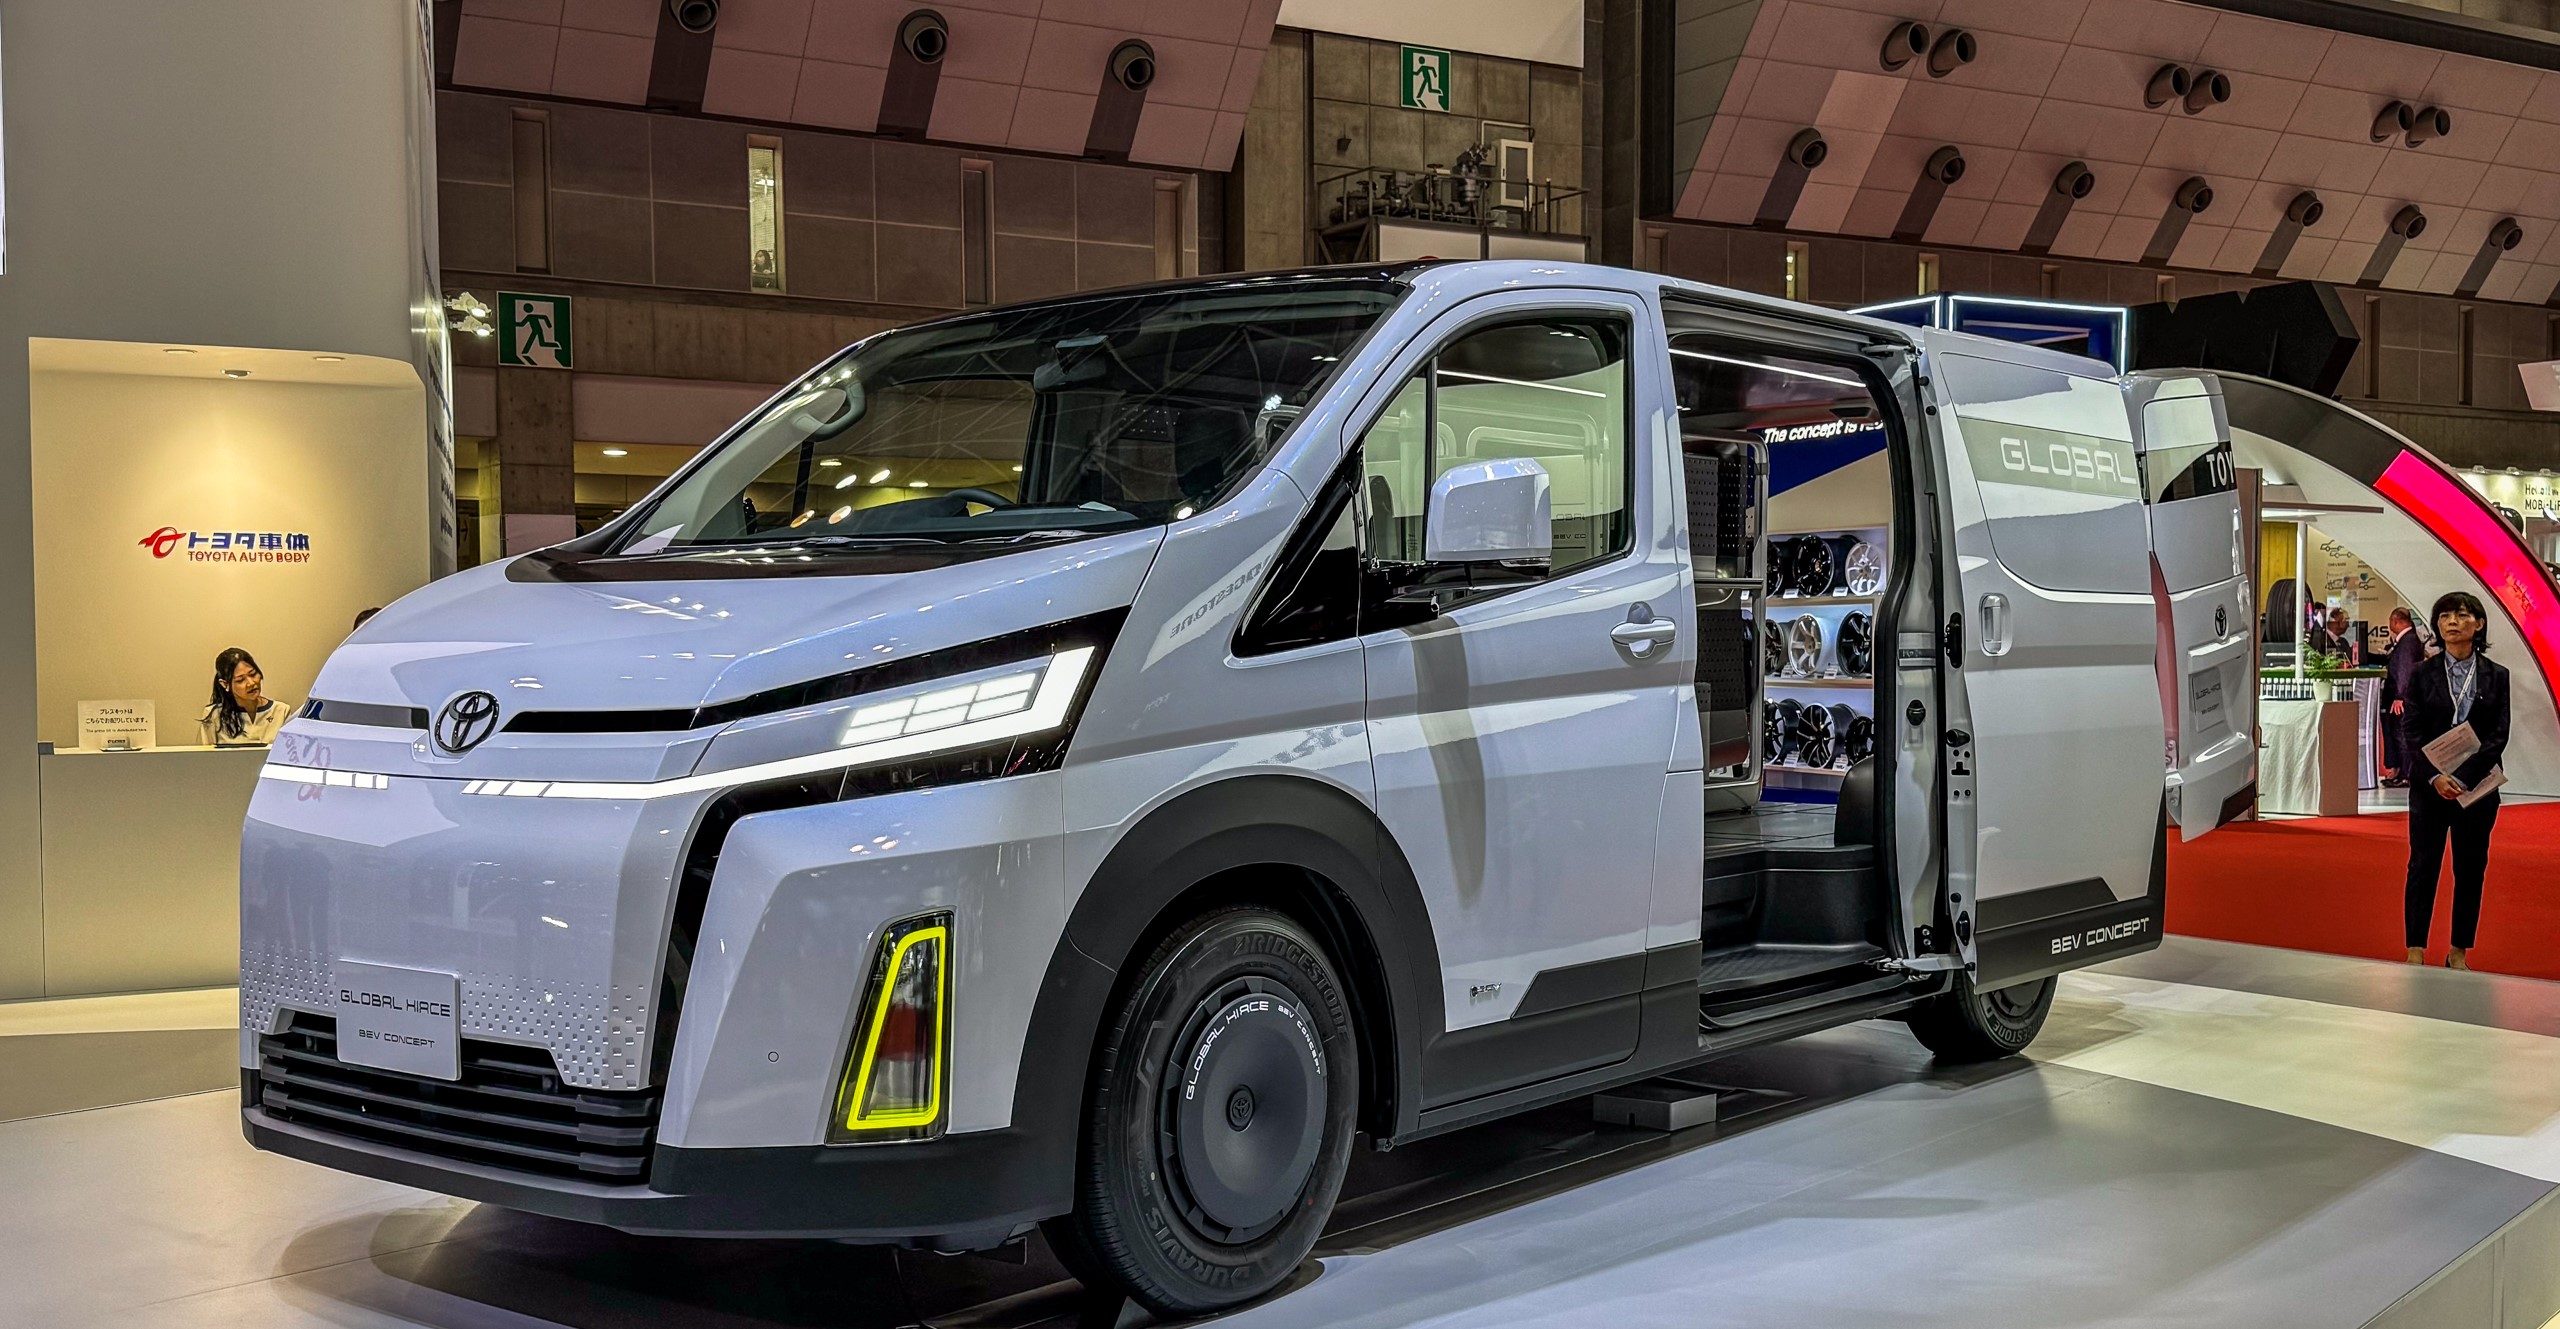 Toyota Presents The Electric Hiace Concept, Giving An Insight Into The Future Of Urban Delivery